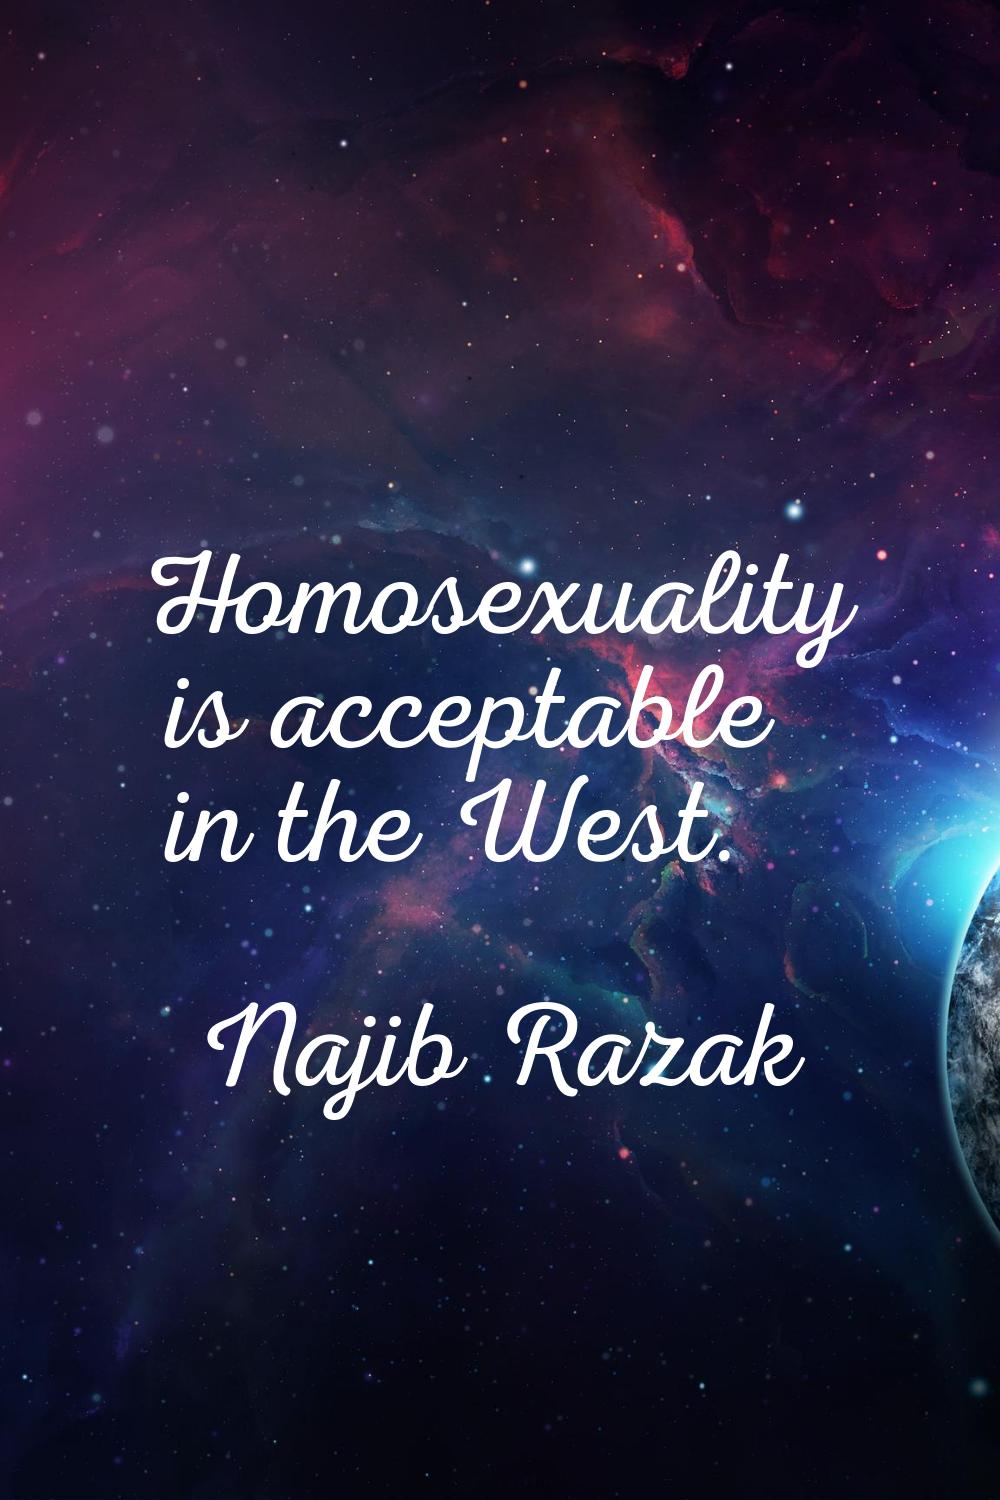 Homosexuality is acceptable in the West.